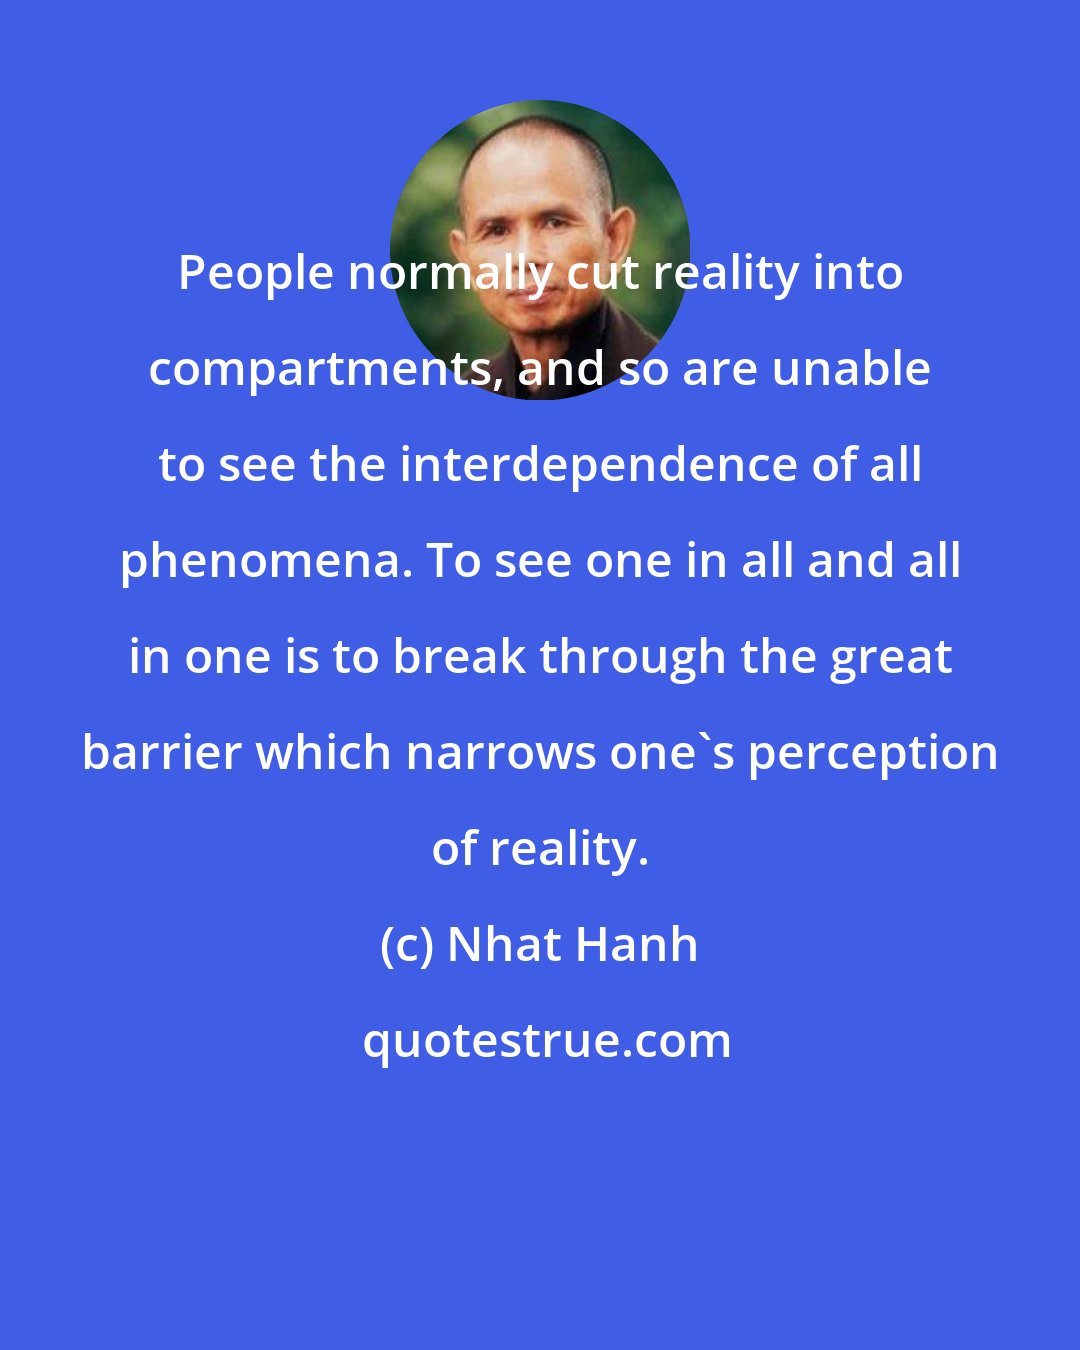 Nhat Hanh: People normally cut reality into compartments, and so are unable to see the interdependence of all phenomena. To see one in all and all in one is to break through the great barrier which narrows one's perception of reality.